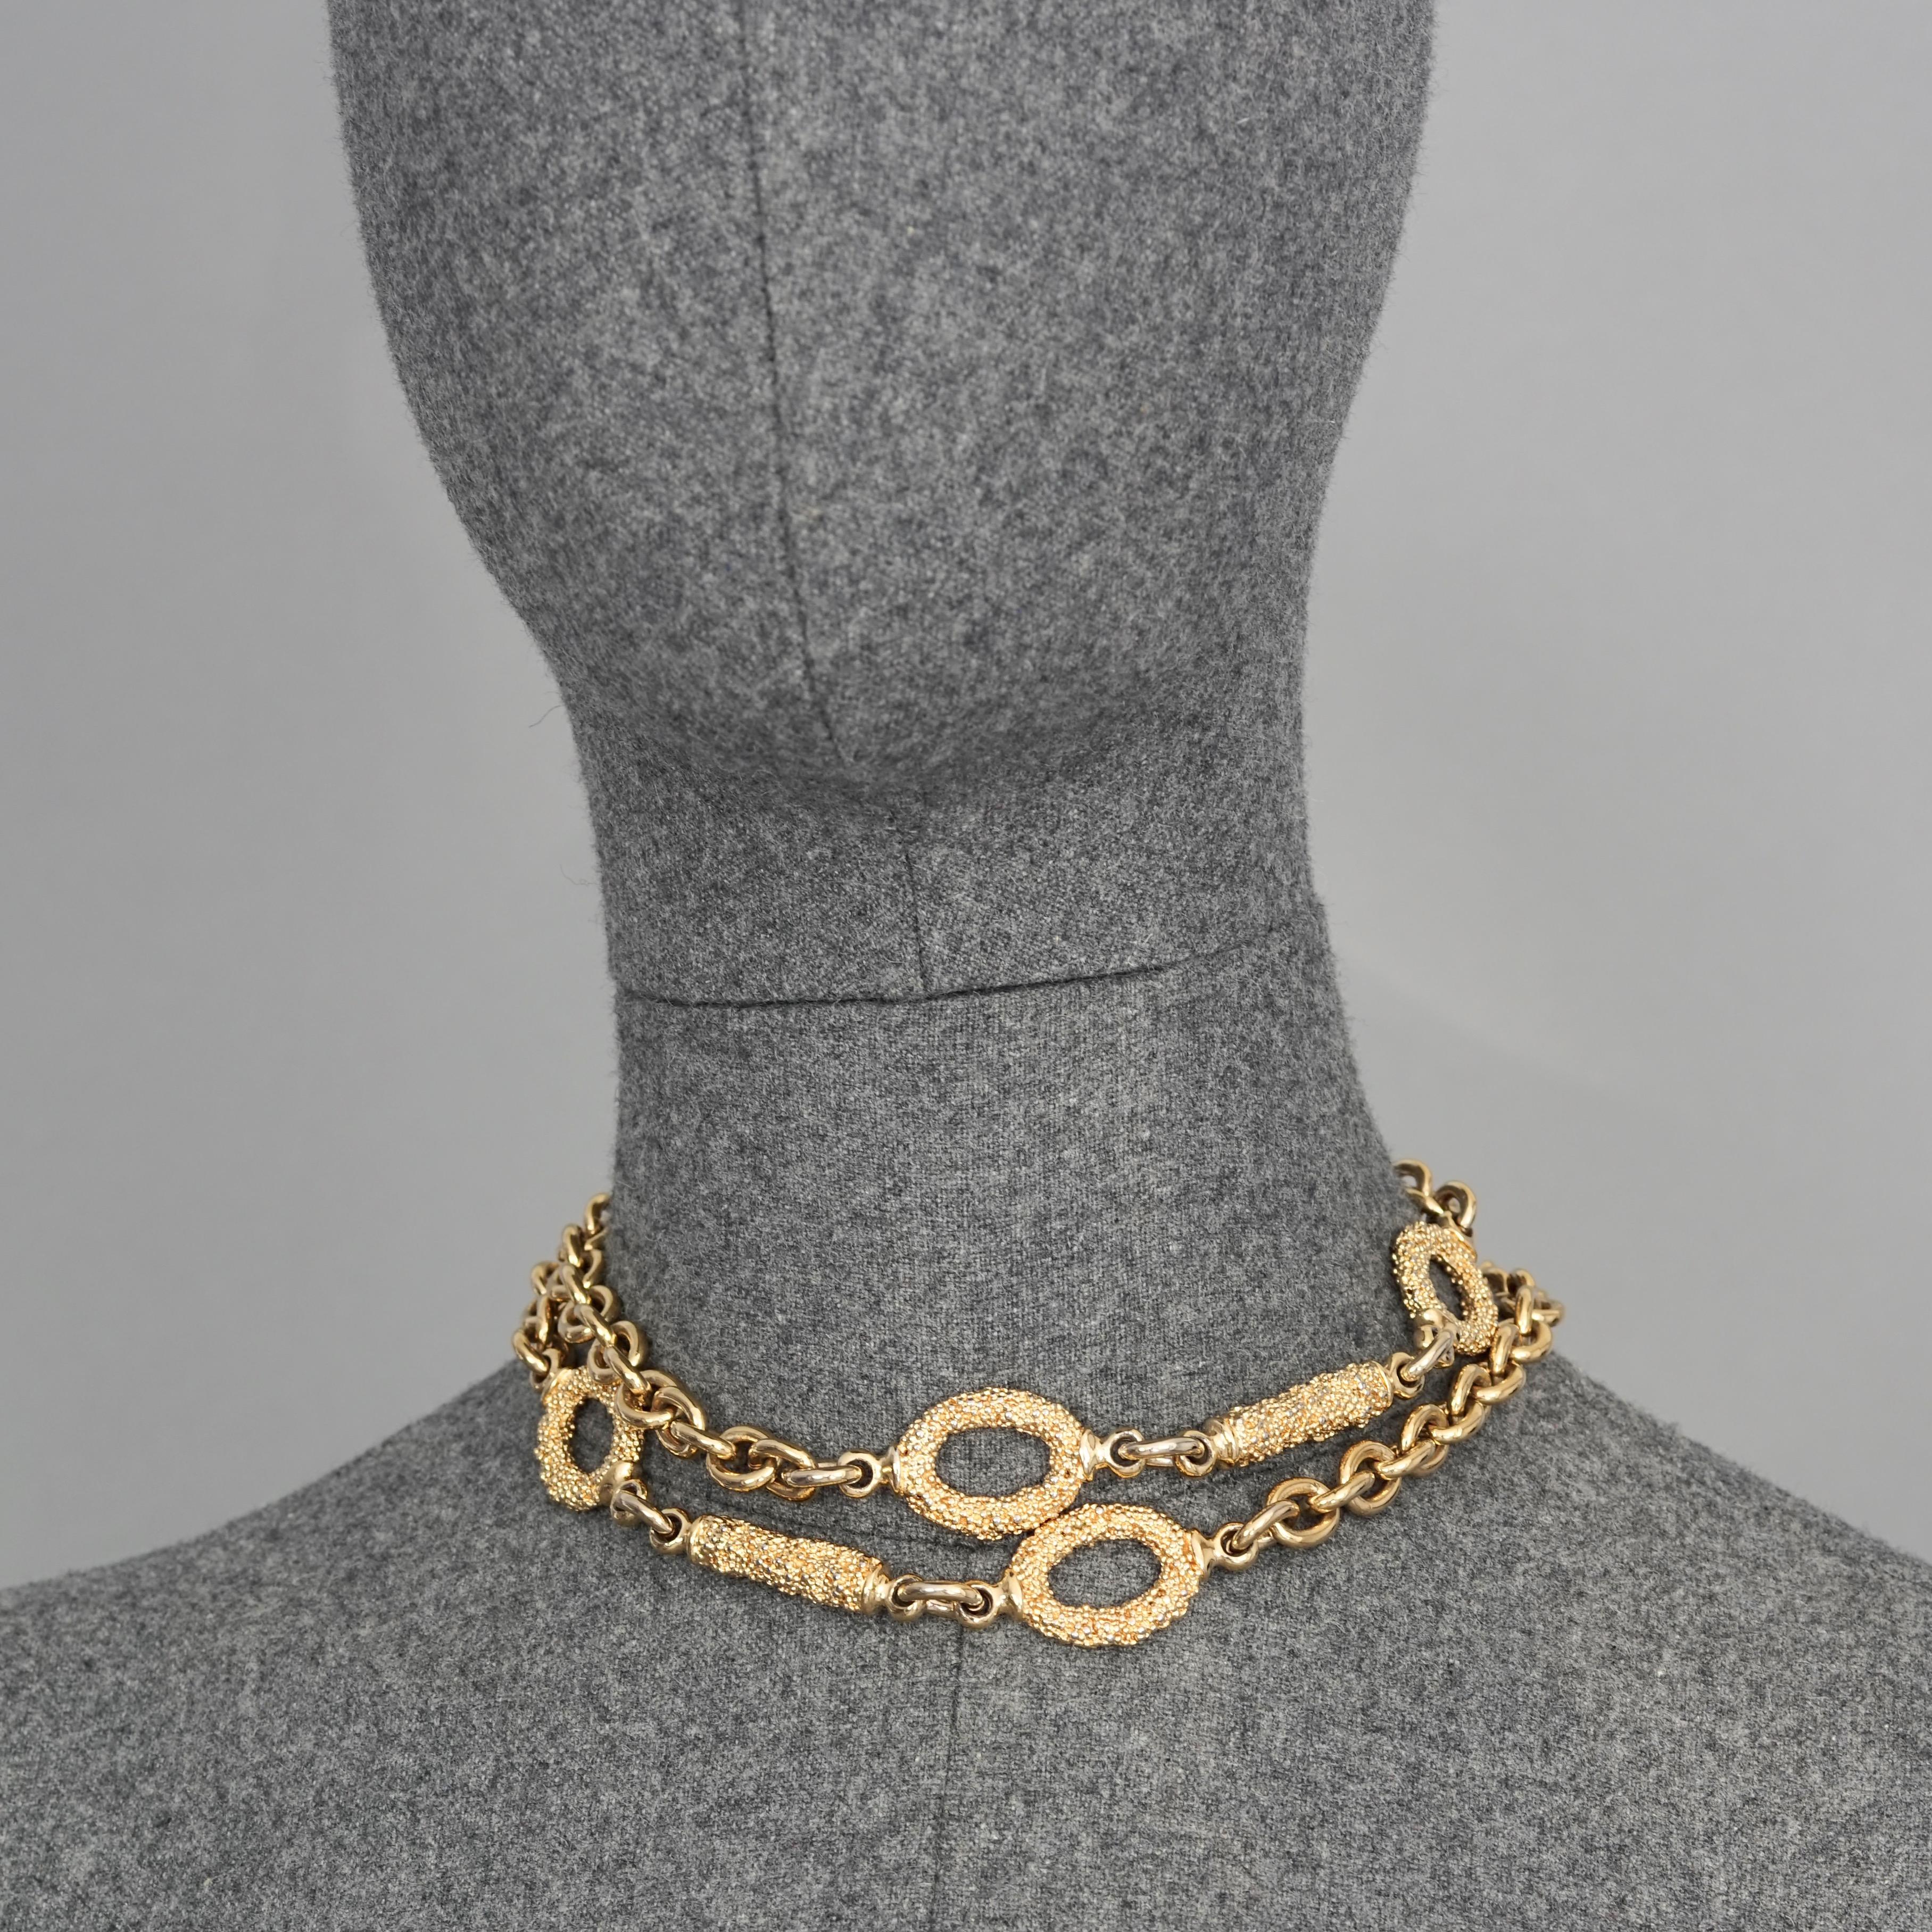 Vintage YVES SAINT LAURENT Ysl Textured Oval and Bar Chain Necklace Belt

Measurements:
Diameter: 0.78 inch (2 cm)
Adjustable Length: 36.22 inches (92 cm) 

Features:
- 100% Authentic YVES SAINT LAURENT.
- Chain with textured oval and bar accents.
-